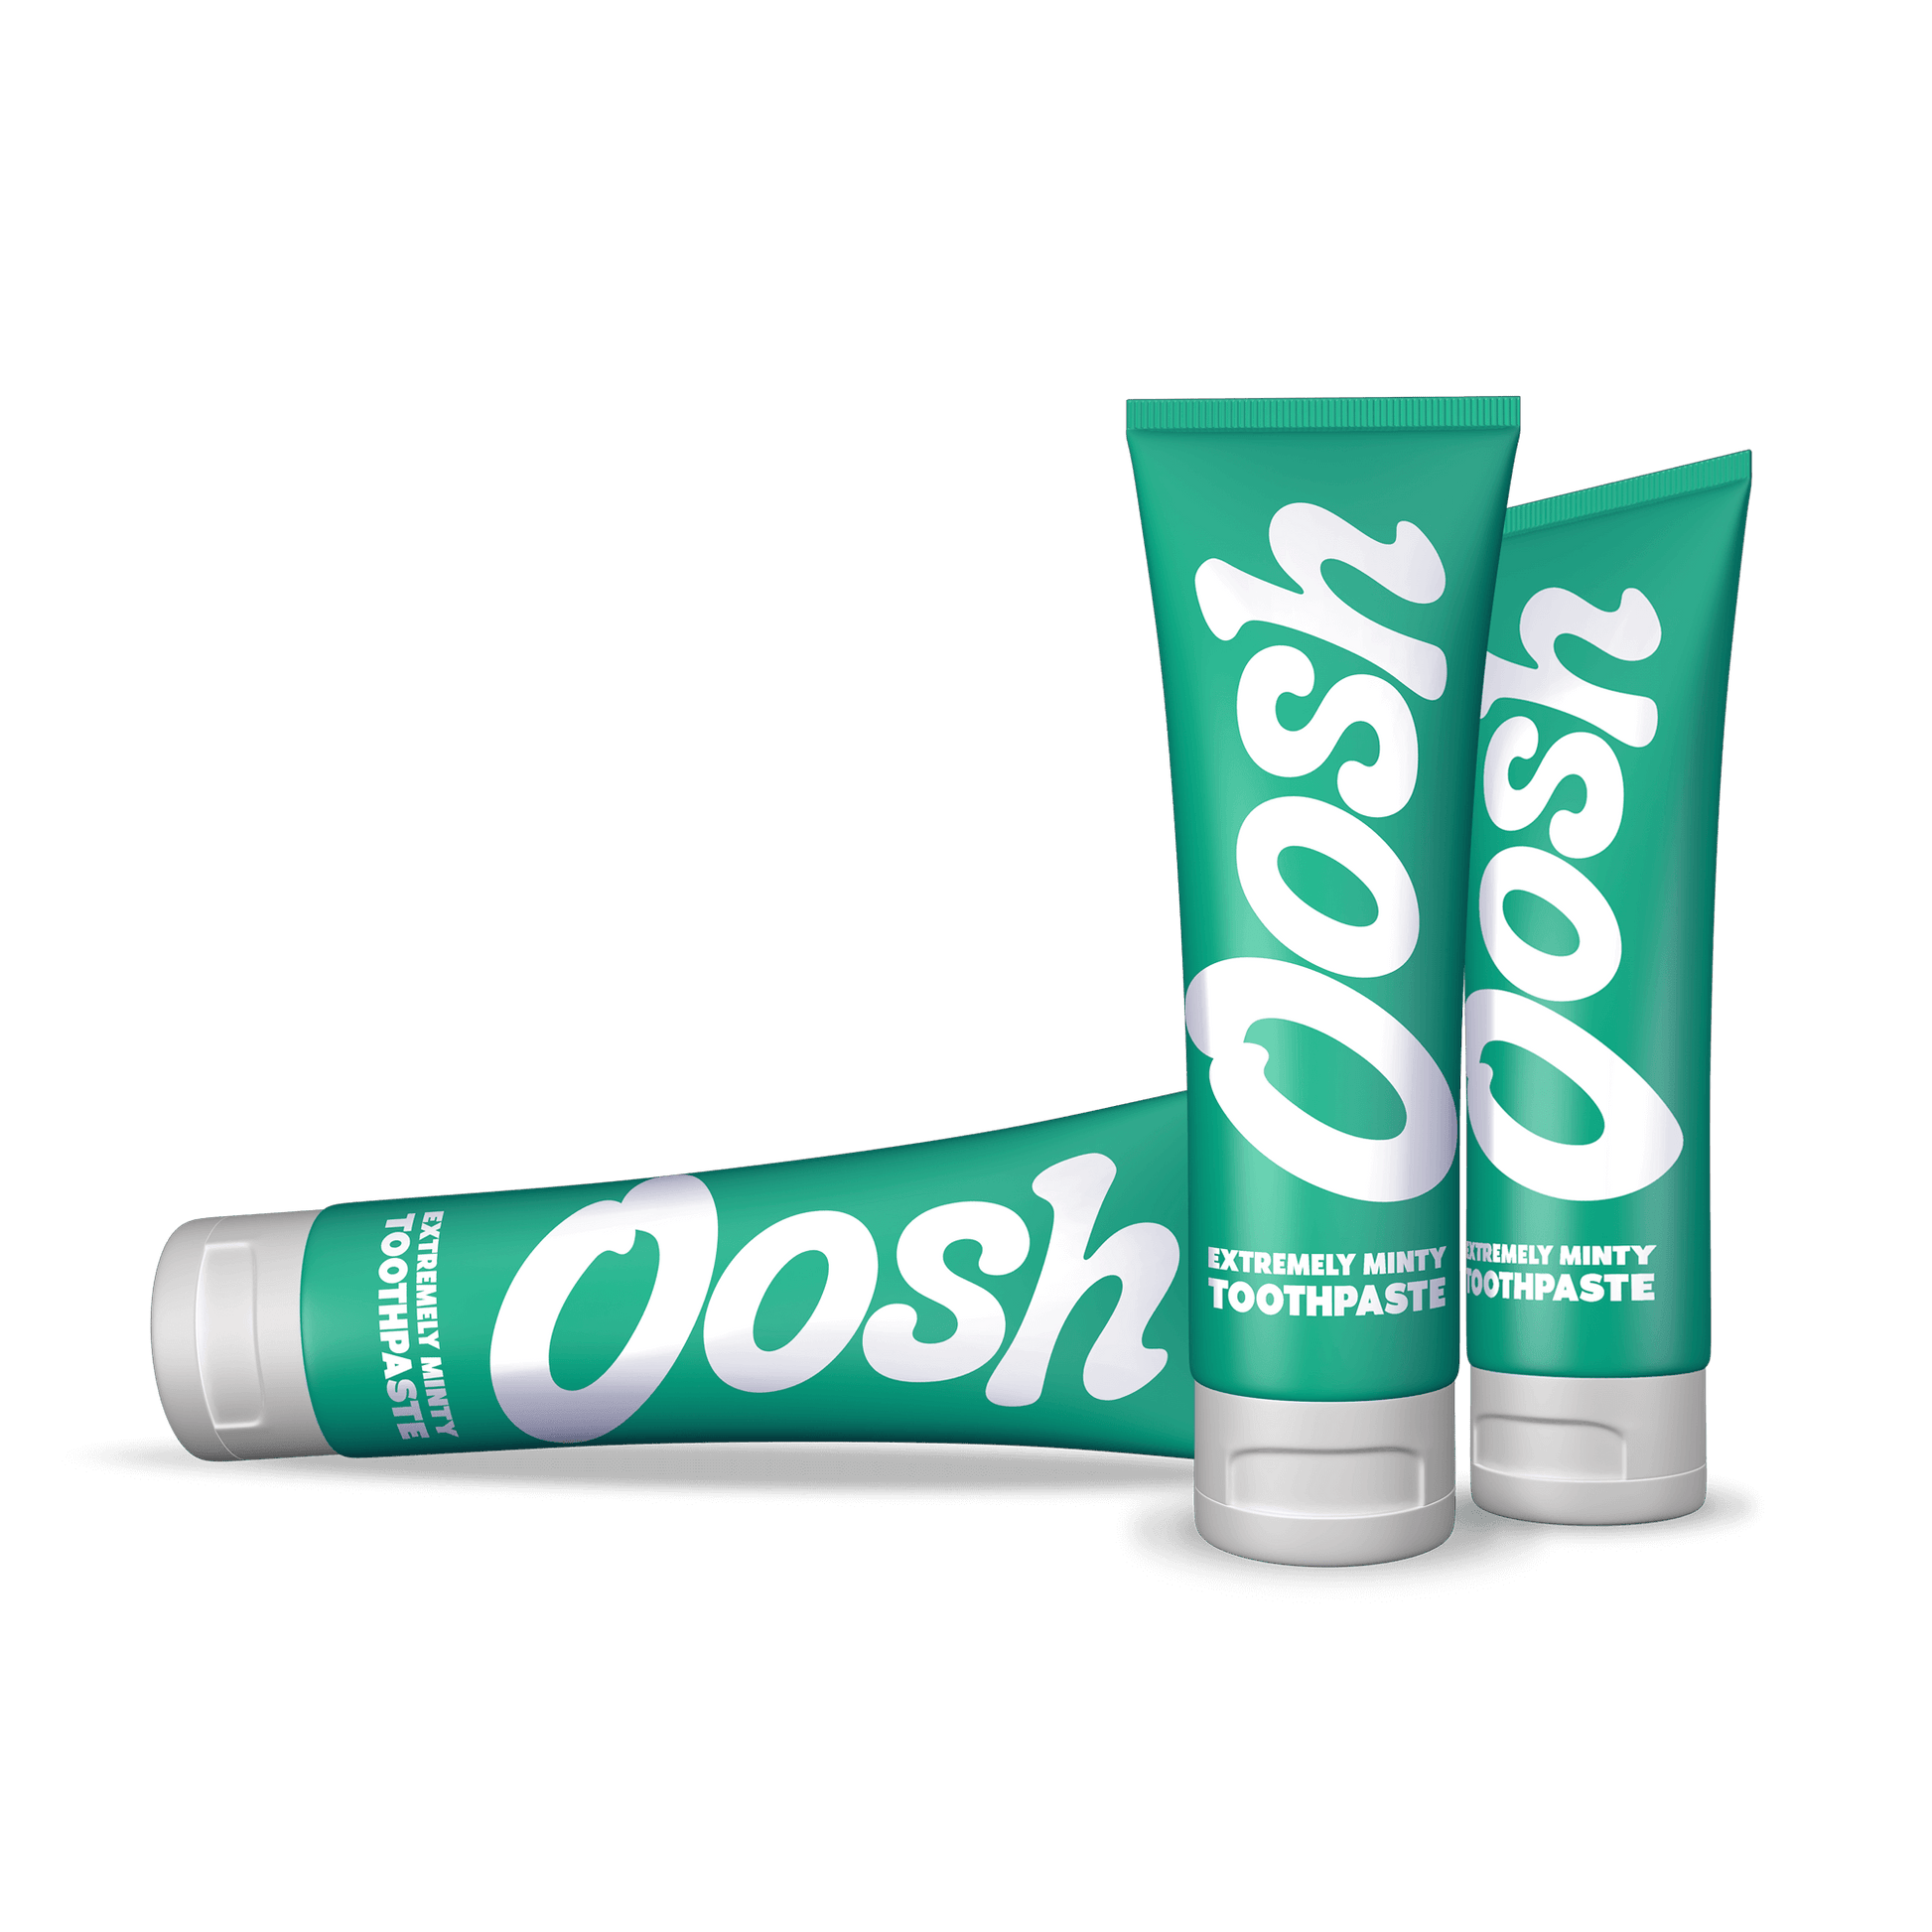 Oosh toothpaste is available in packs of 3